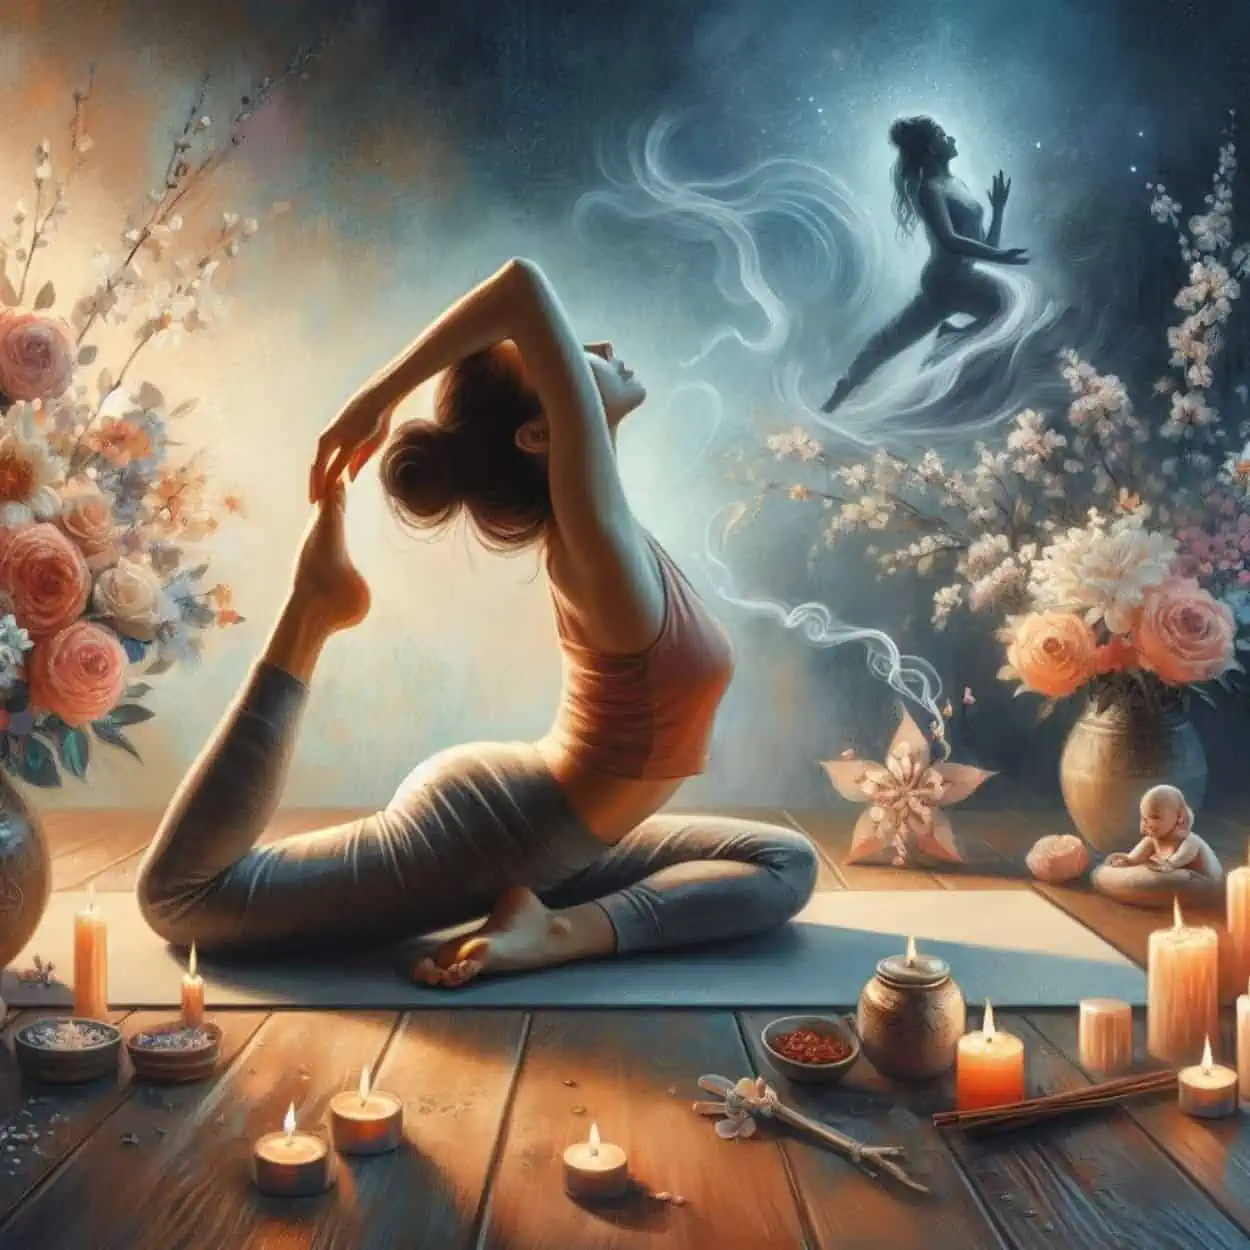 In this image a girl is doing yin yoga for grounding and centering